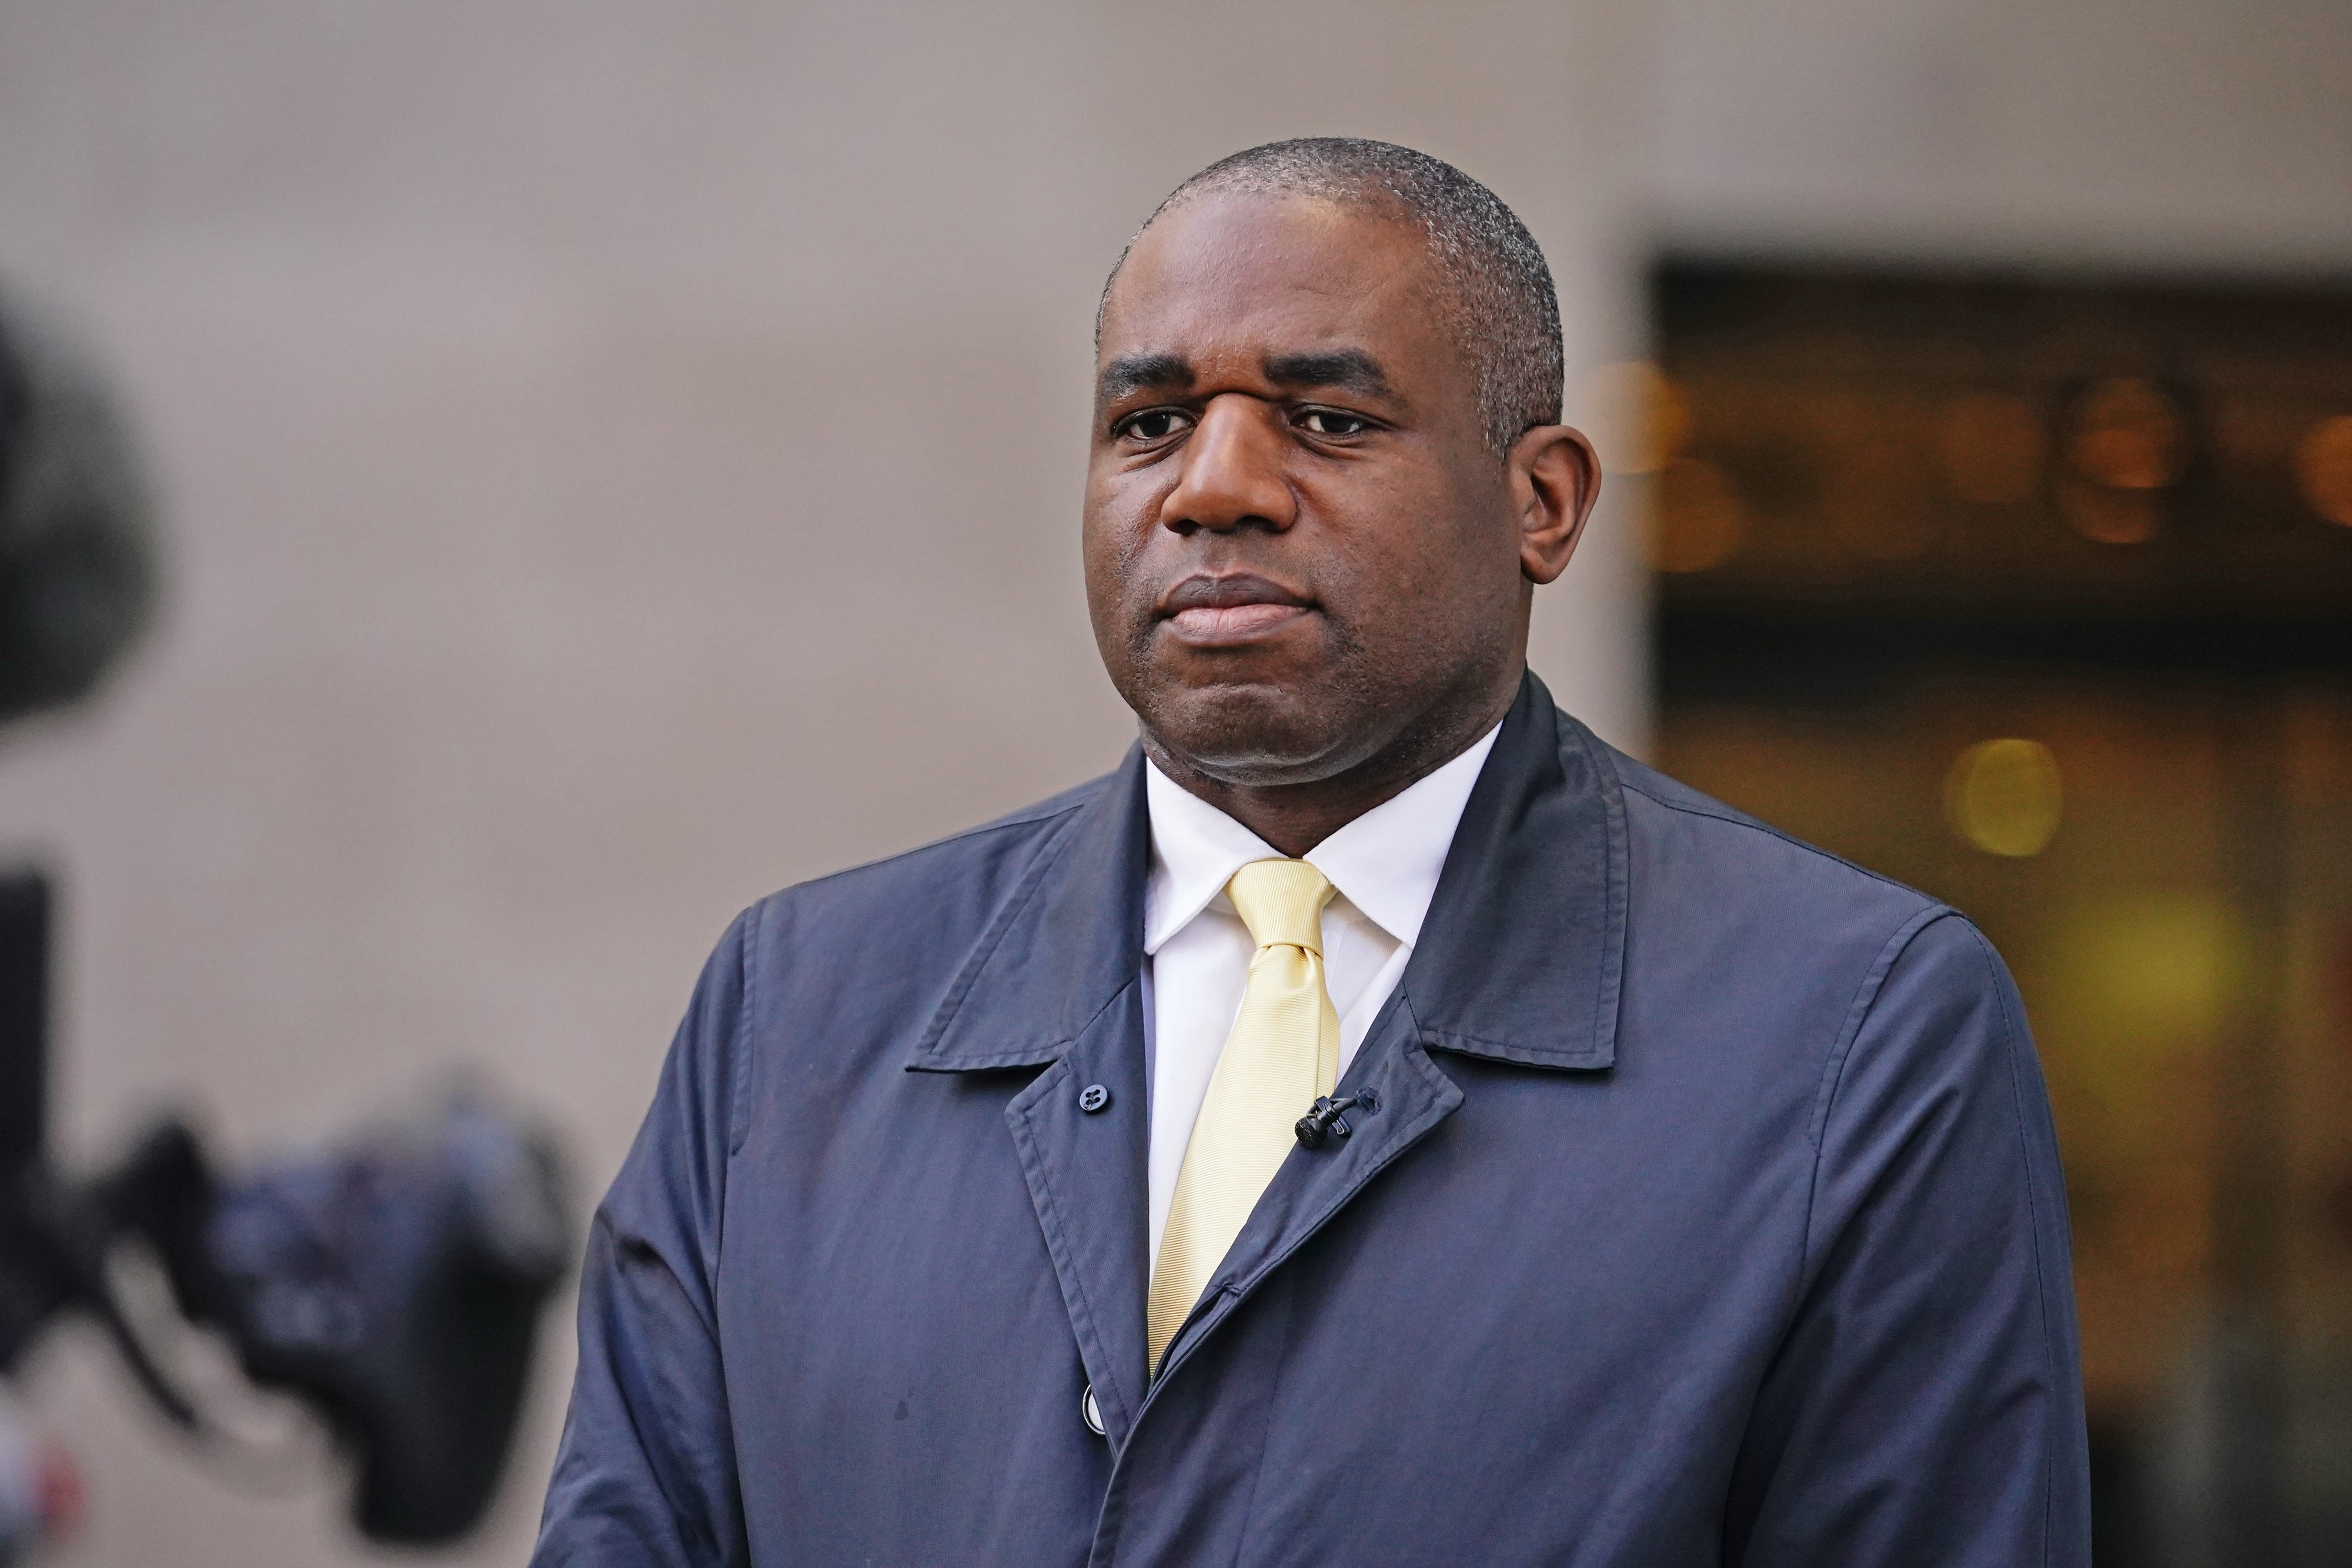 Mr Lammy described the threat as ‘truly despicable’